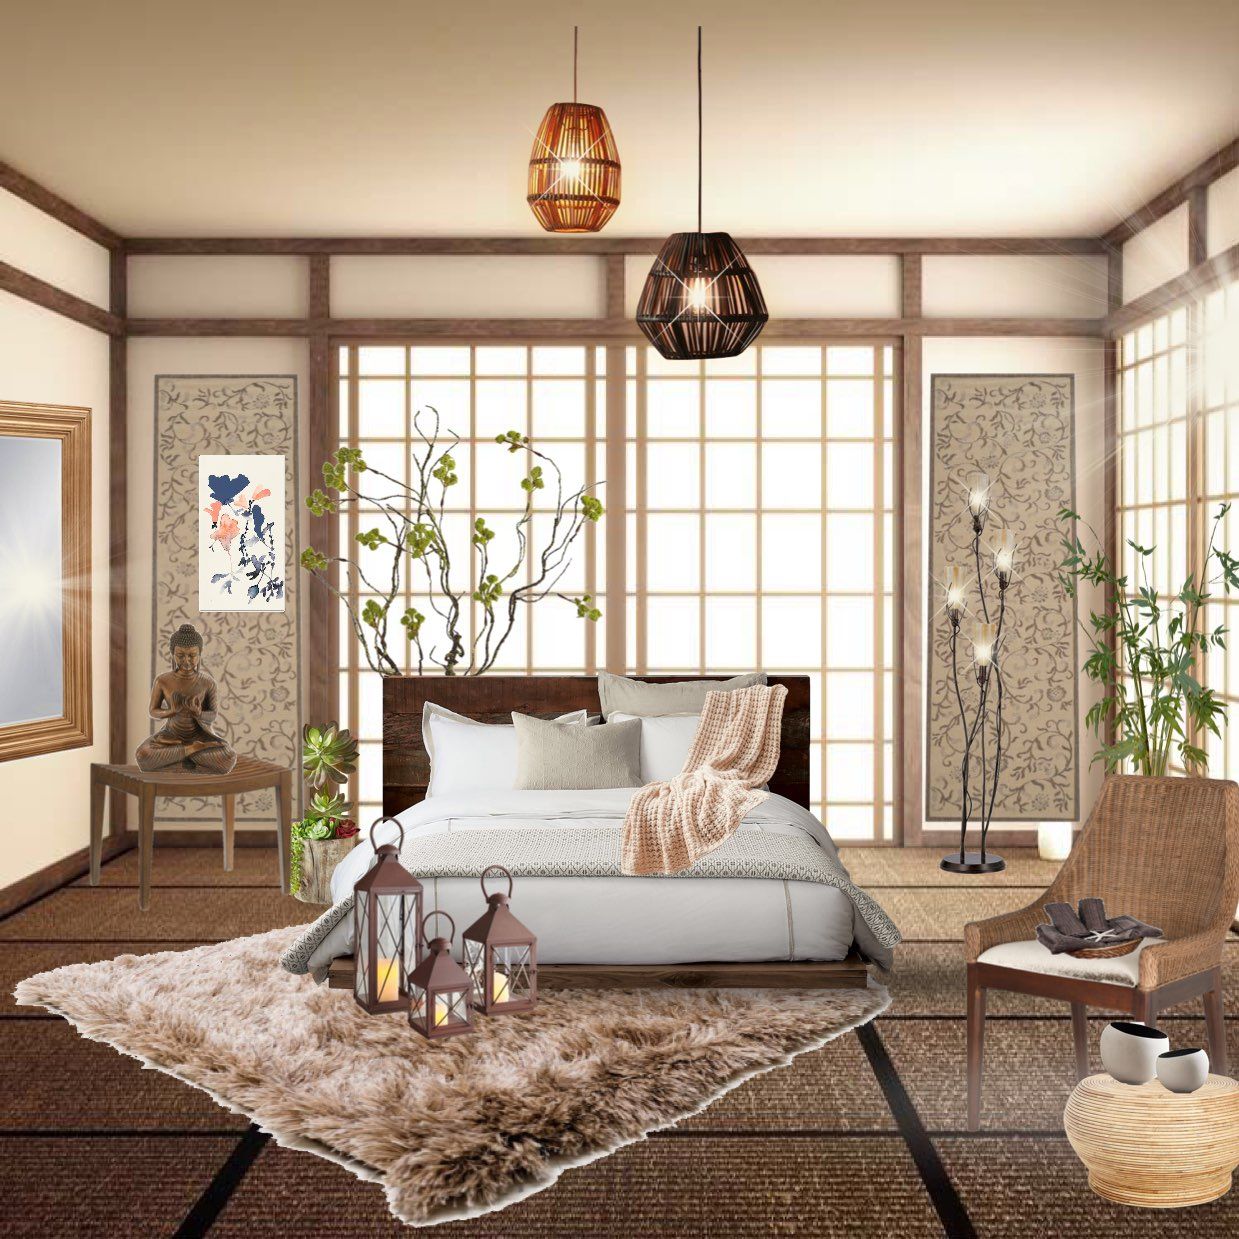 Bedroom asian house zen bedrooms style decor most relaxing interior homes designs bedfordale ultimate landscape suzanne hunt modern master contemporary